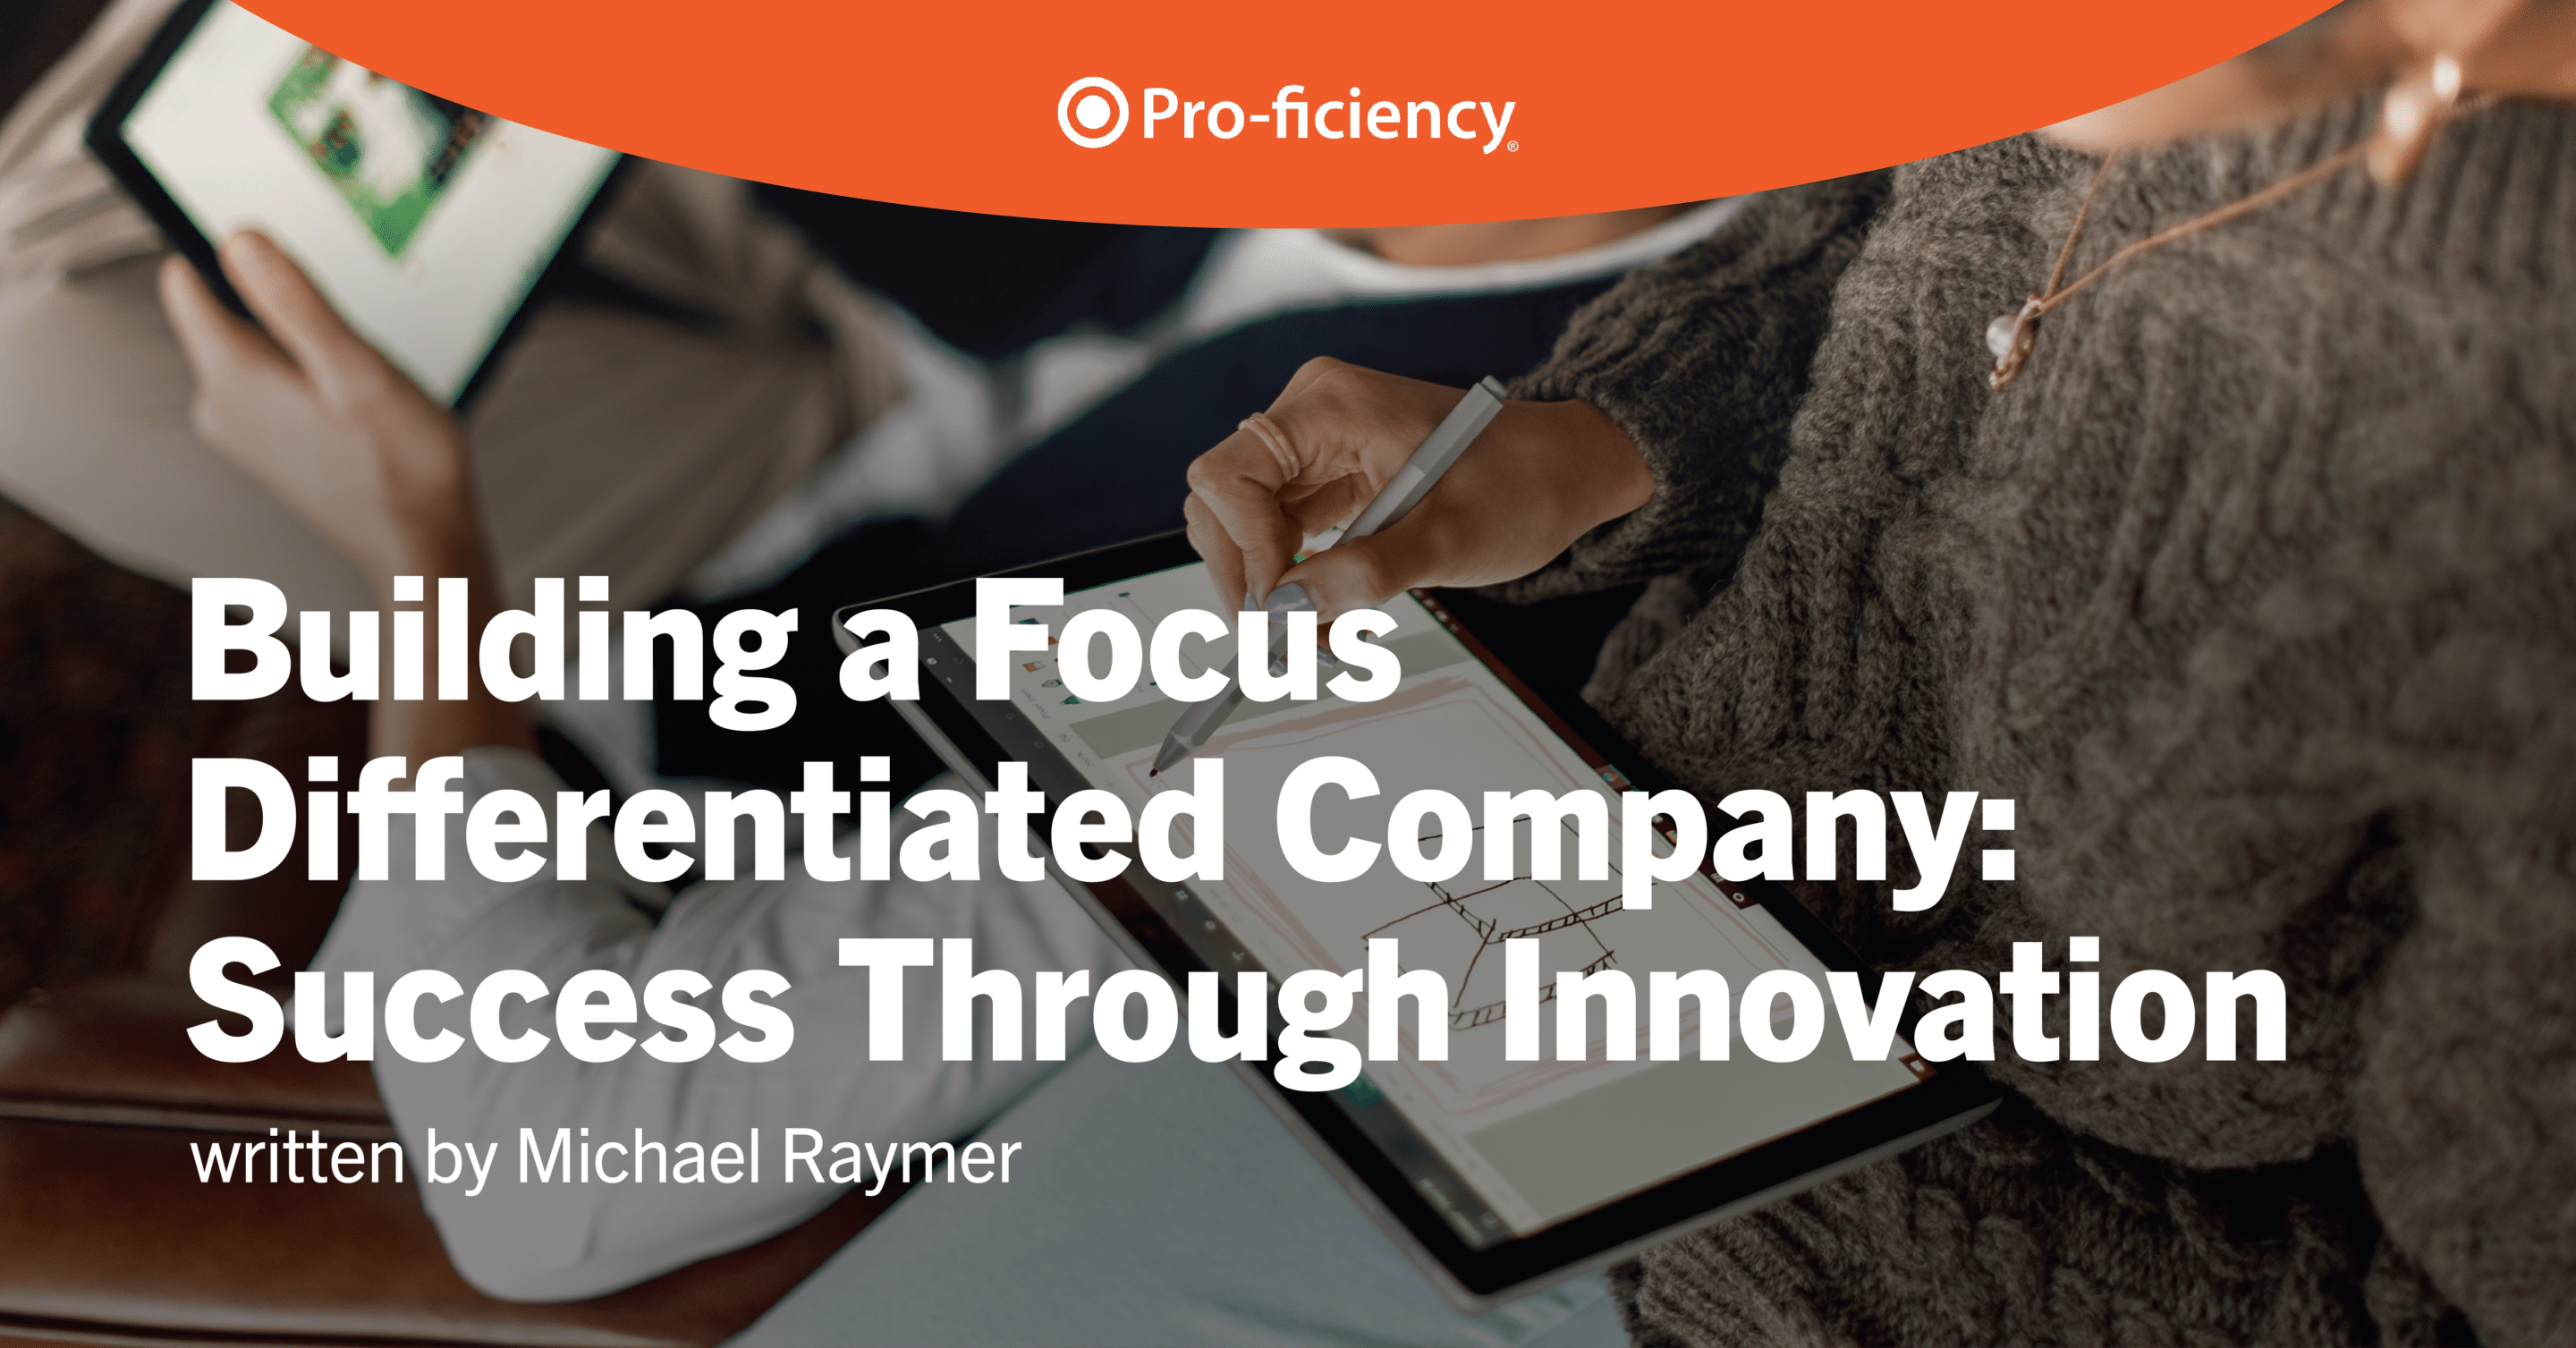 Building a Focus Differentiated Company: Success Through Innovation